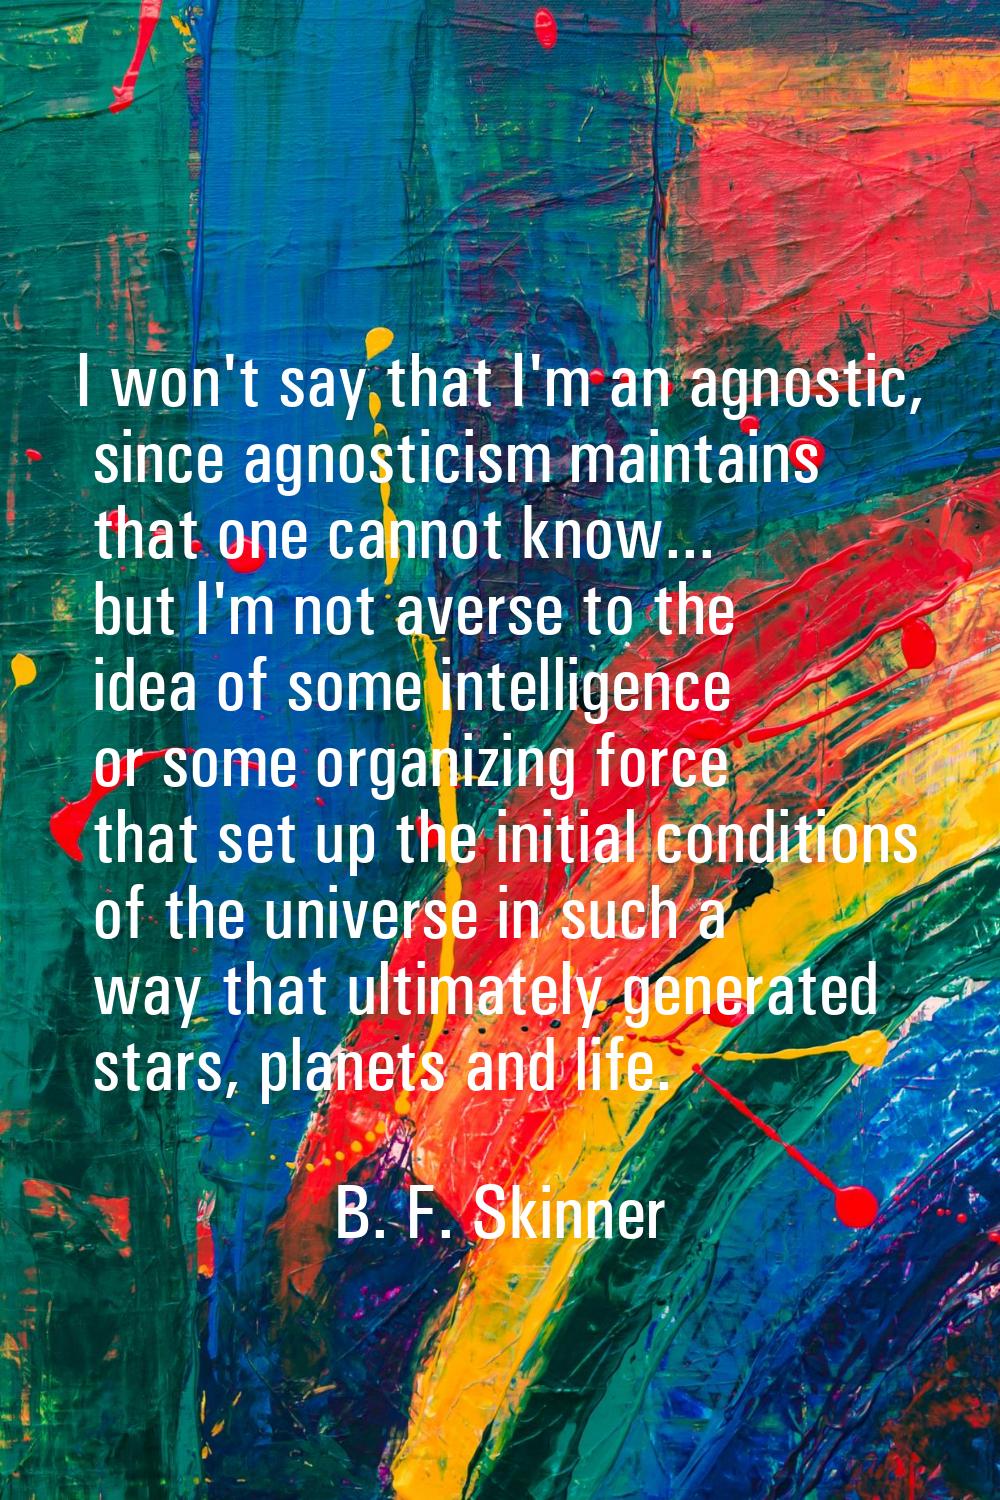 I won't say that I'm an agnostic, since agnosticism maintains that one cannot know... but I'm not a